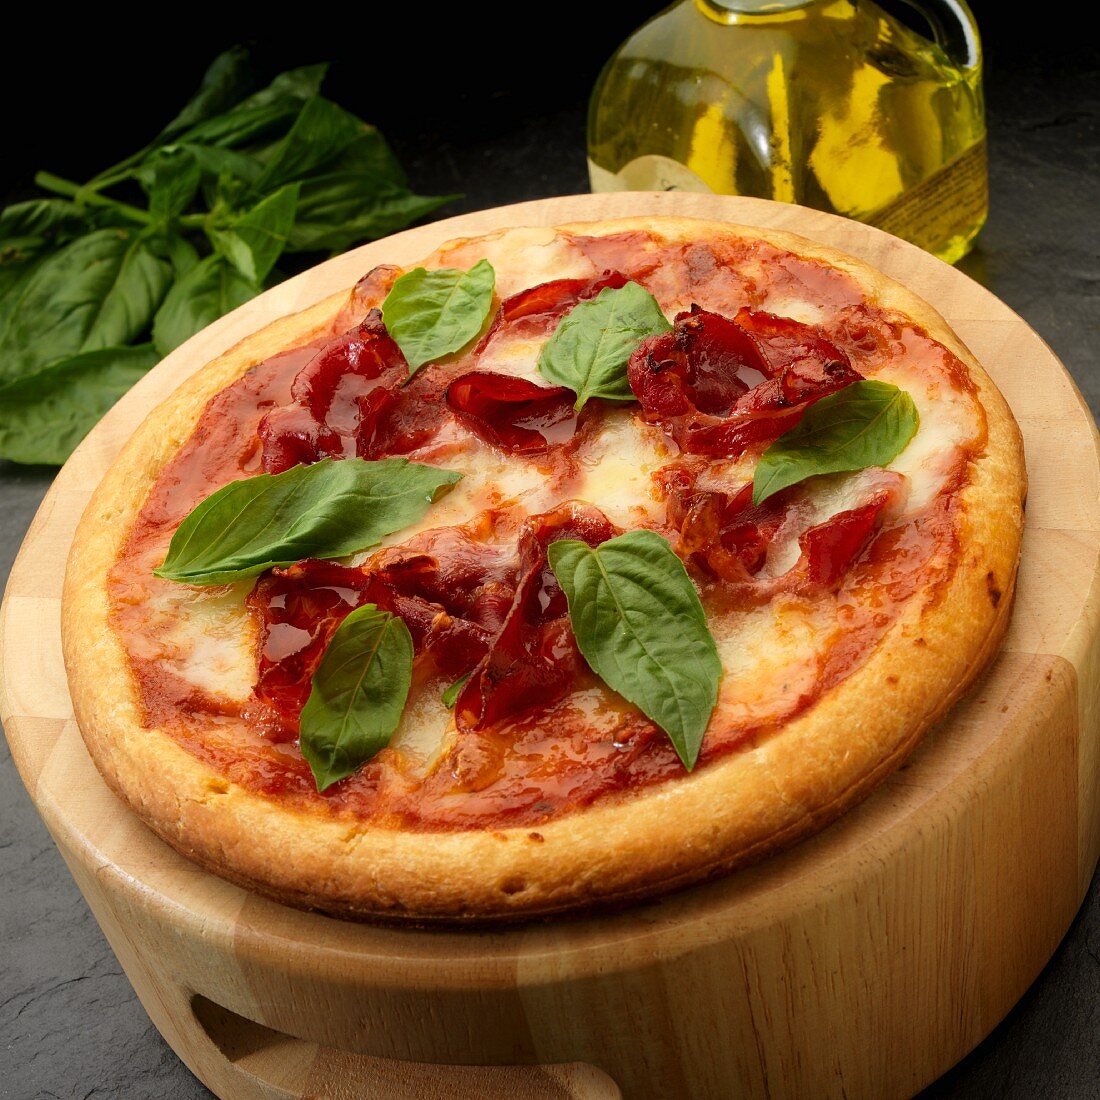 Pizza with tomato sauce, Capicola and mozzarella with basil leaves